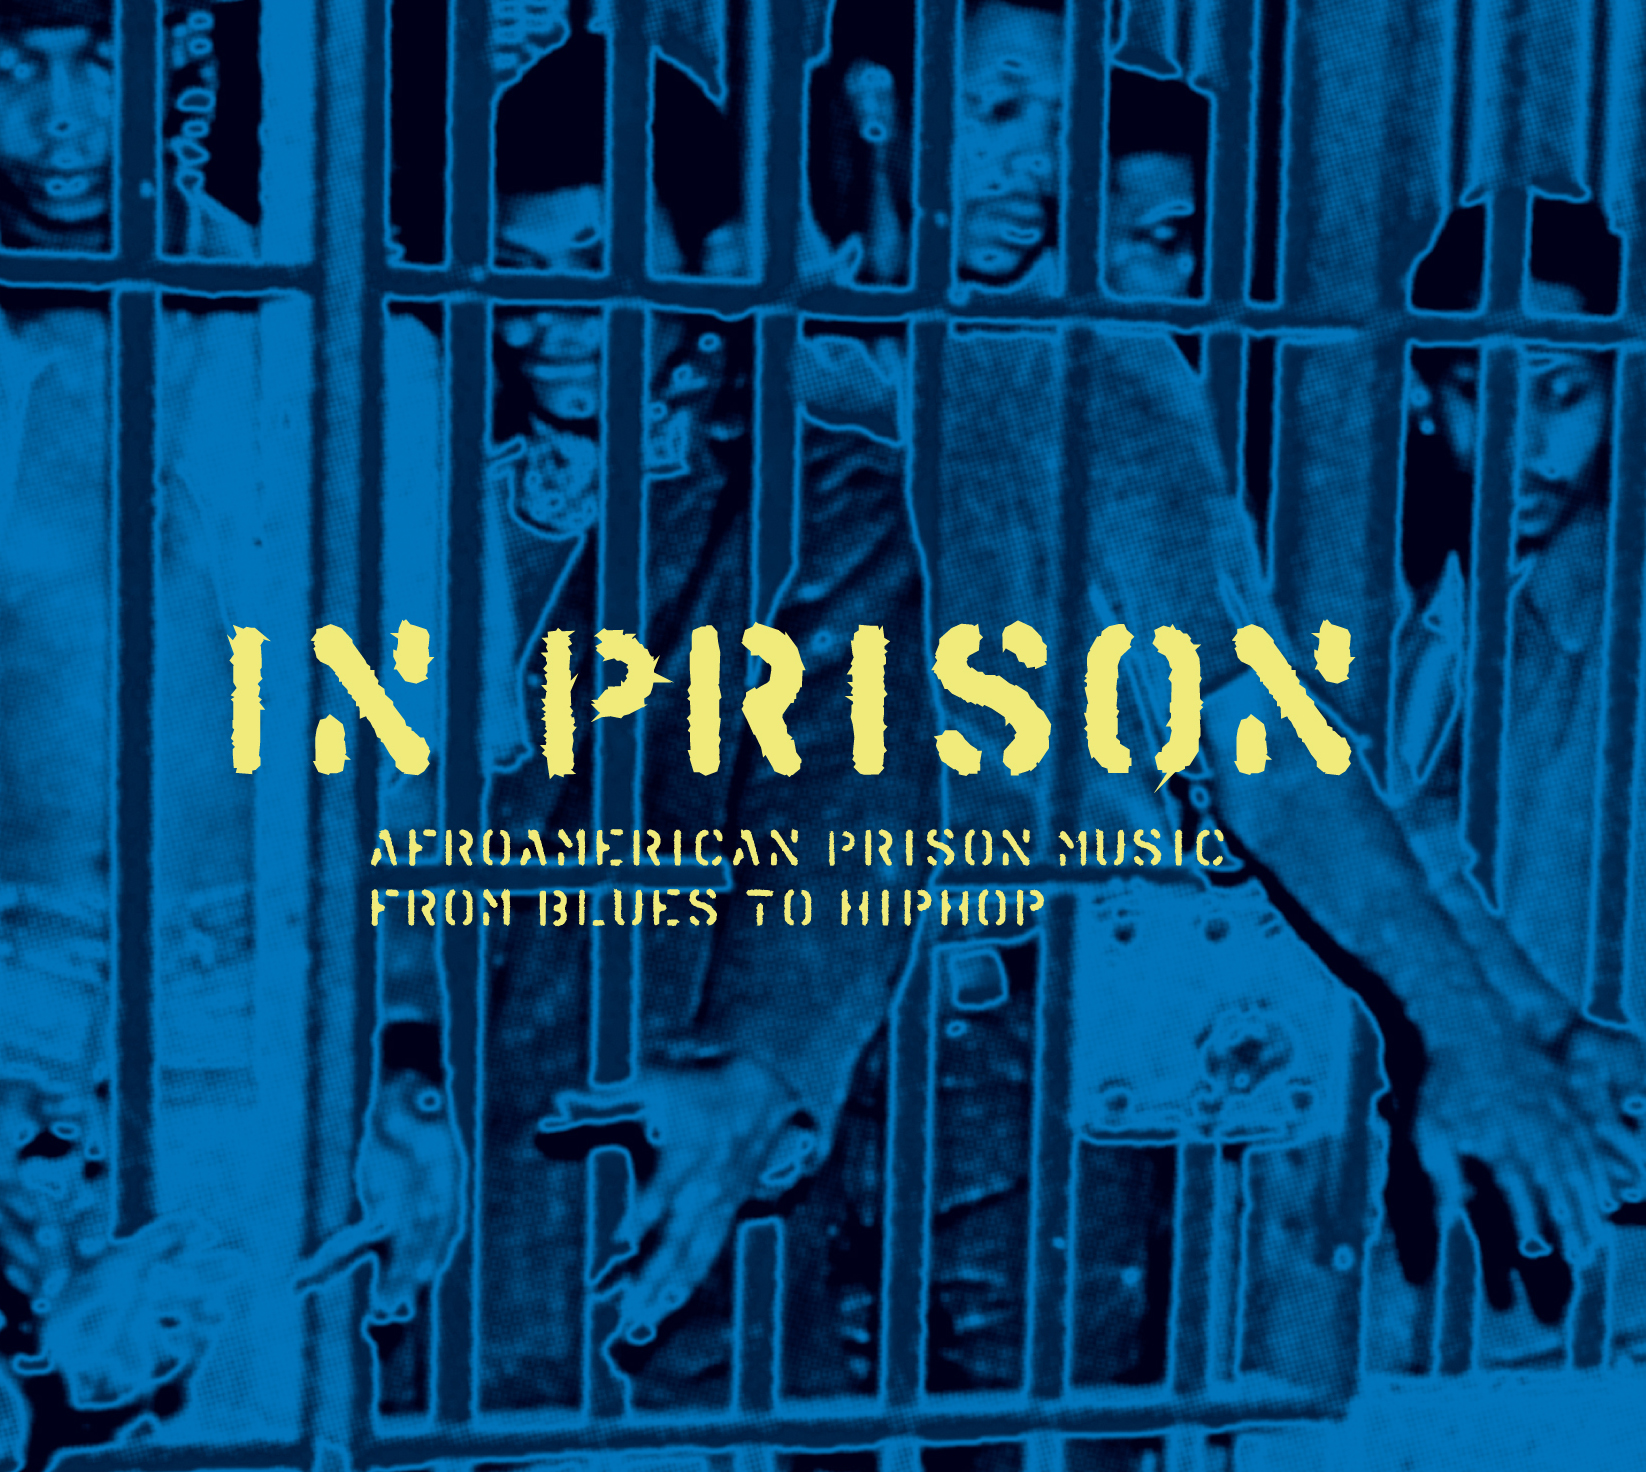 In Prison - Afroamerican Prison Music from Blues to HipHop